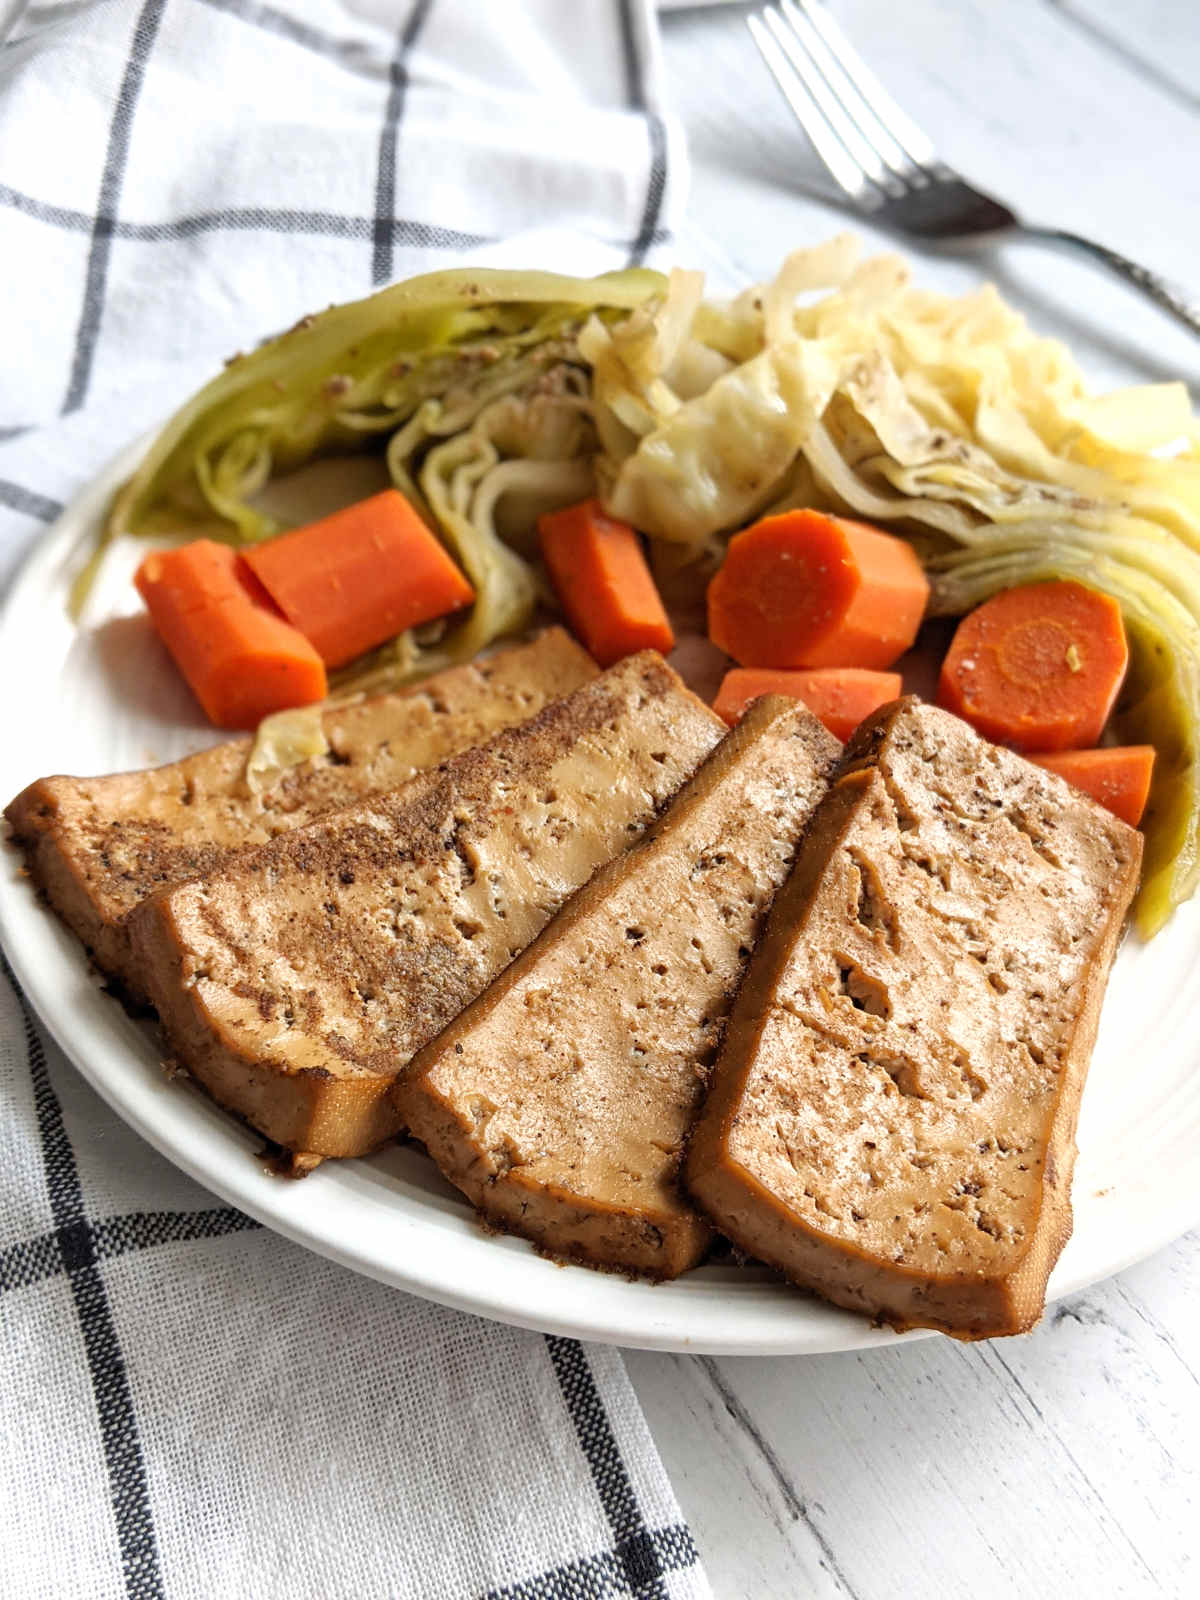 Vegan corned beef with braised cabbage and carrots on a plate.